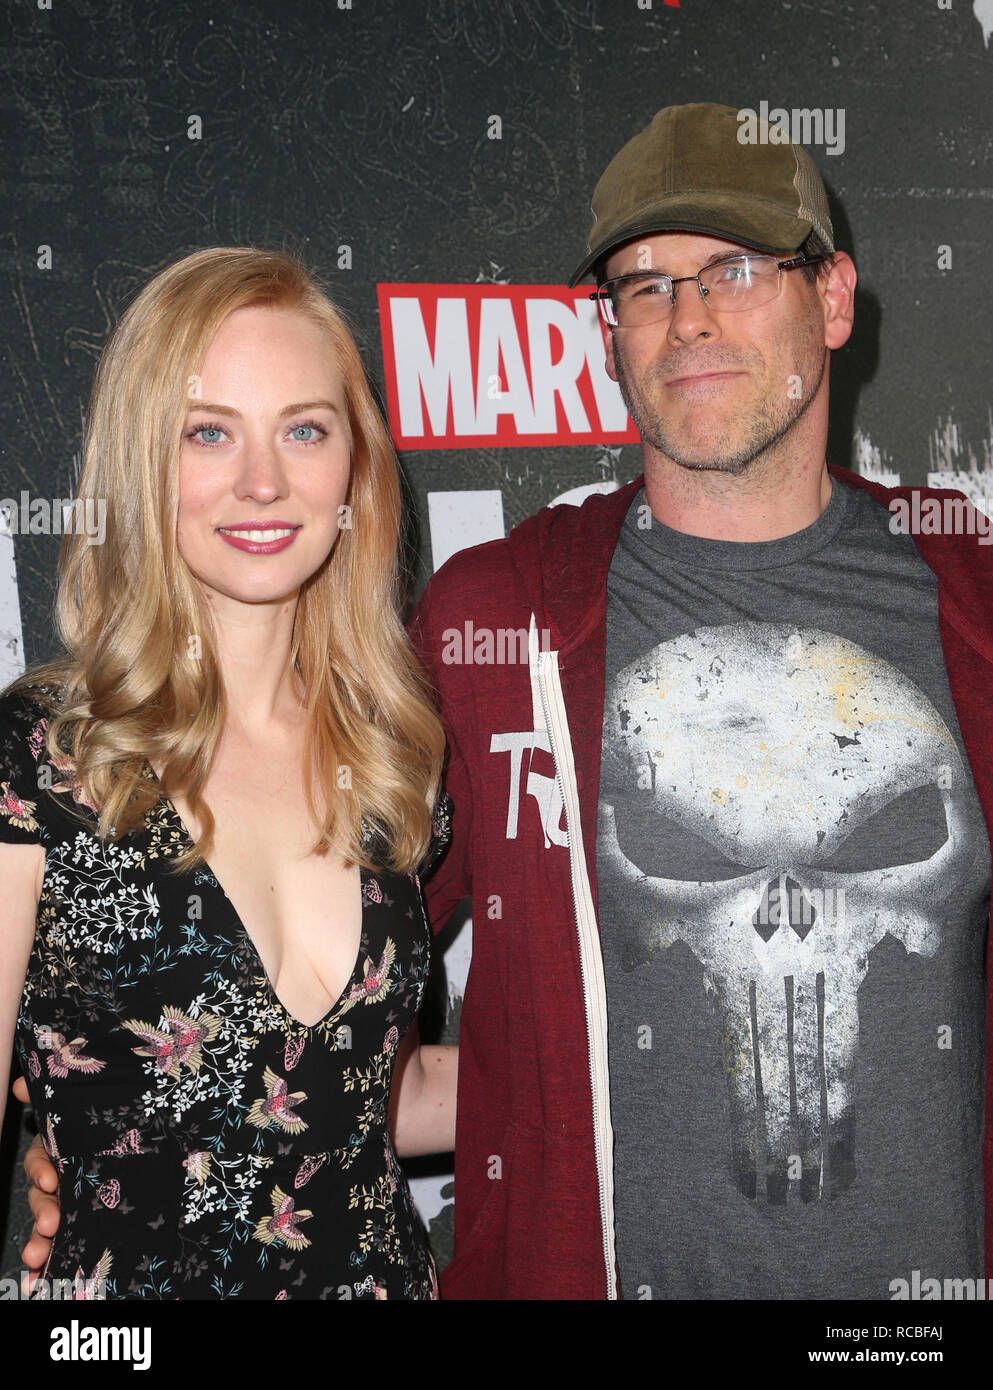 Hollywood, Ca. 14th Jan, 2019. Deborah Ann Woll, E.J. Scott, attends Marvel's 'The Punisher' Los Angeles Premiere at ArcLight Hollywood in Hollywood, California on January 14, 2019. Credit: Faye Sadou/Media Punch/Alamy Live News Stock Photo